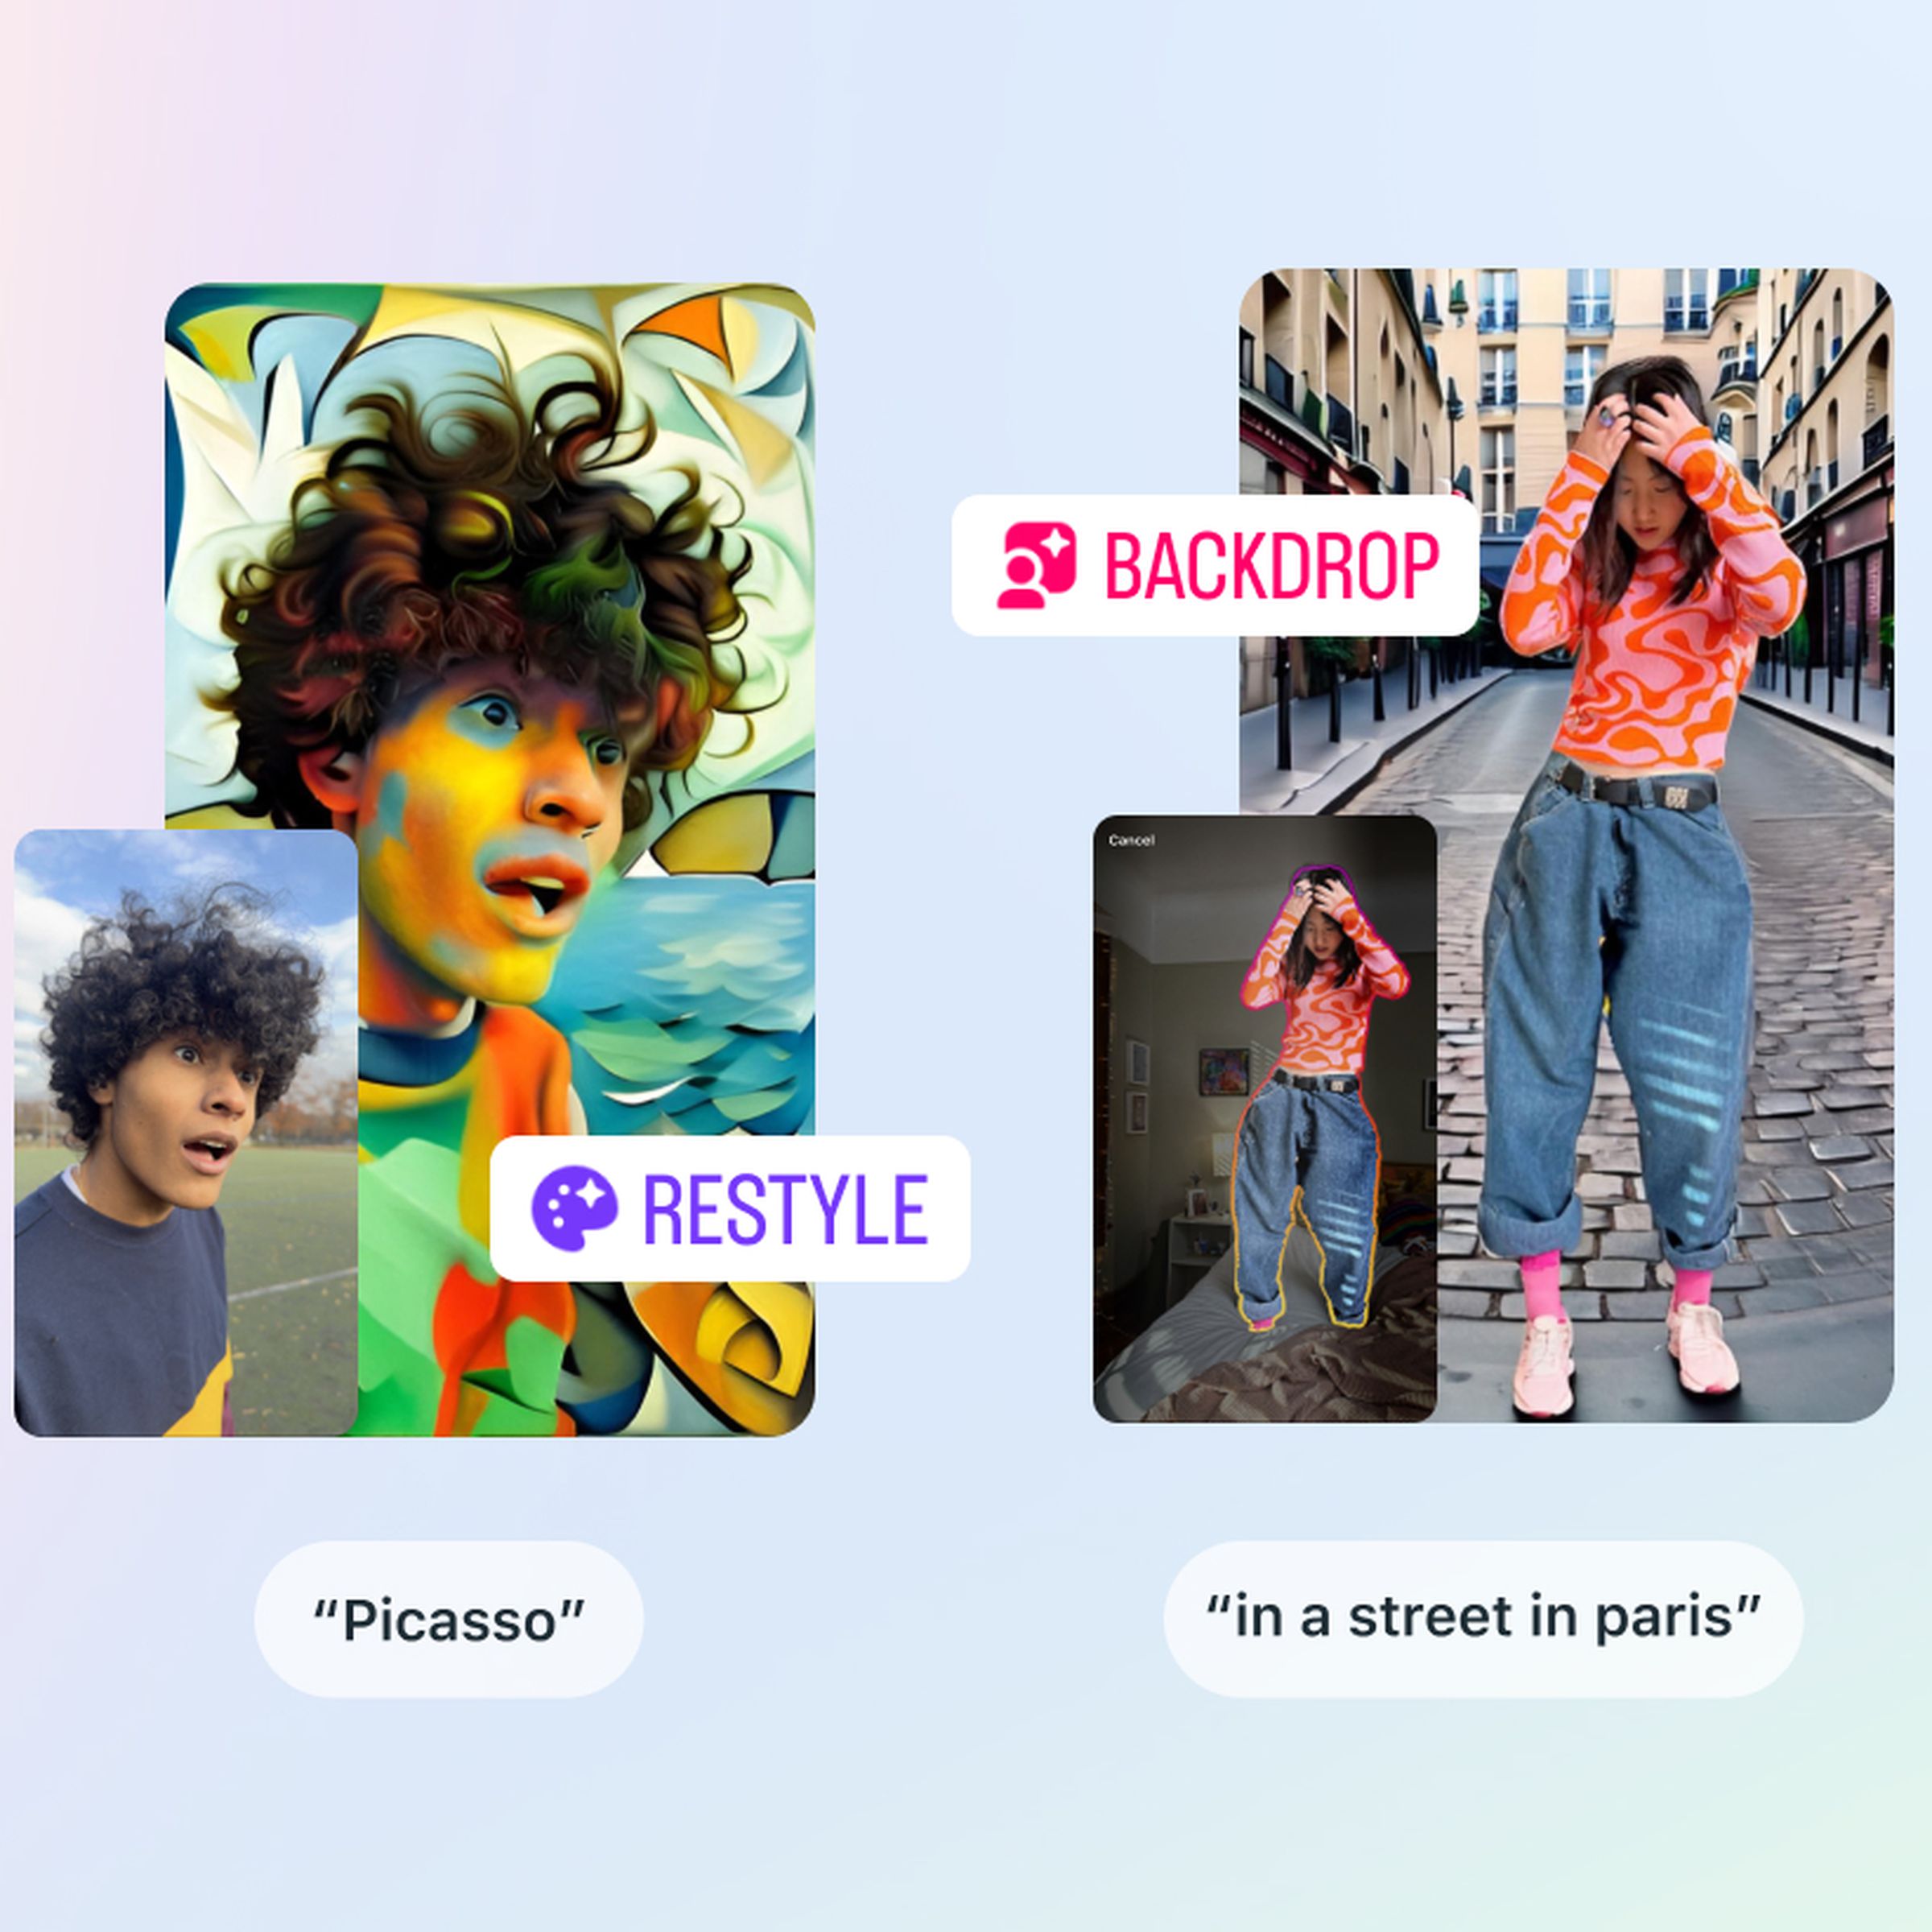 Meta AI tools restyle and backdrop showing original images edited AI-powered versions. One is a selfie in the style of “Picasso” and the other is an image “in a street in Paris.”